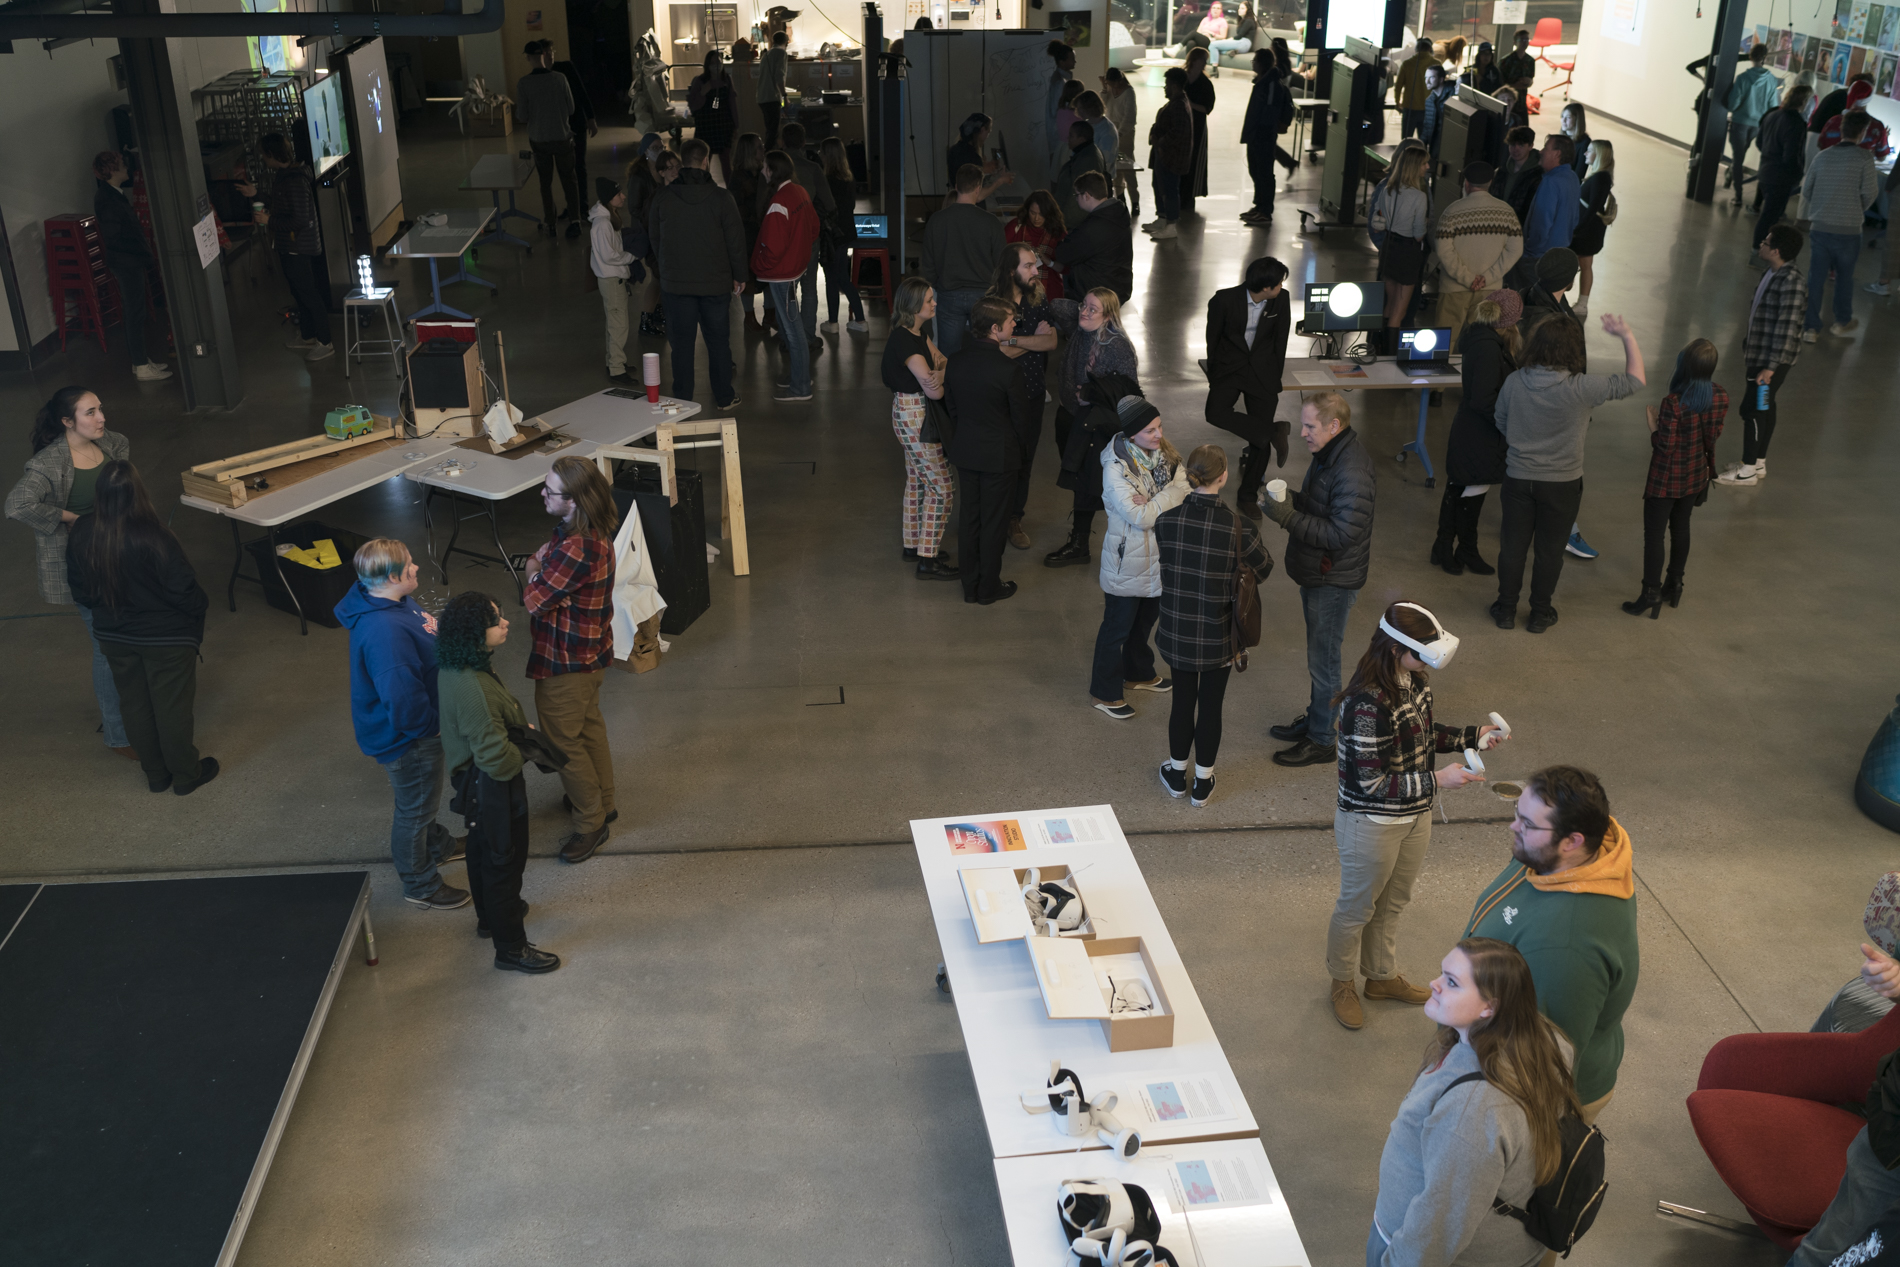 The Open Studios event on Dec. 8 features work from multiple classes from students in emerging media arts and theatre-design and technical production. Photo by Laura Cobb.